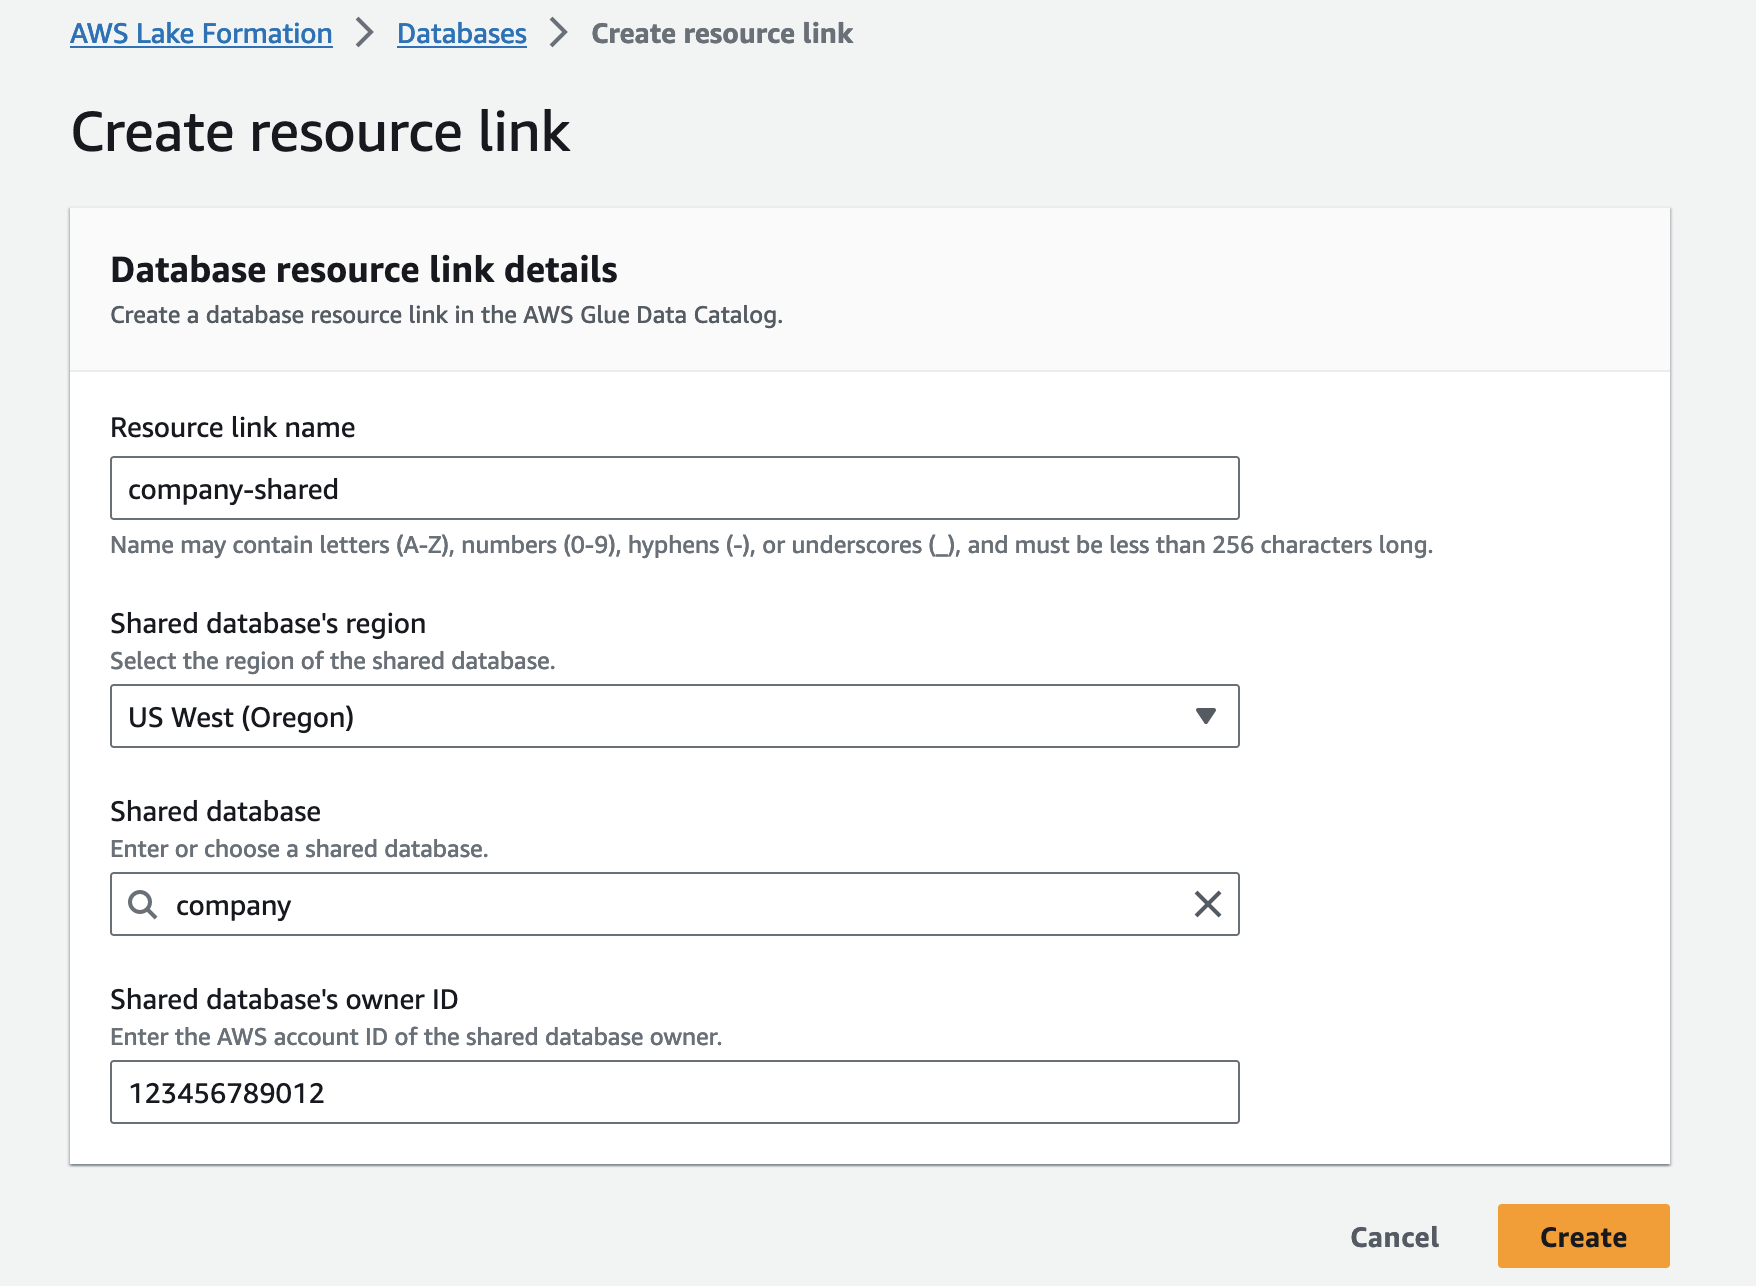 Create a resource link for the shared database